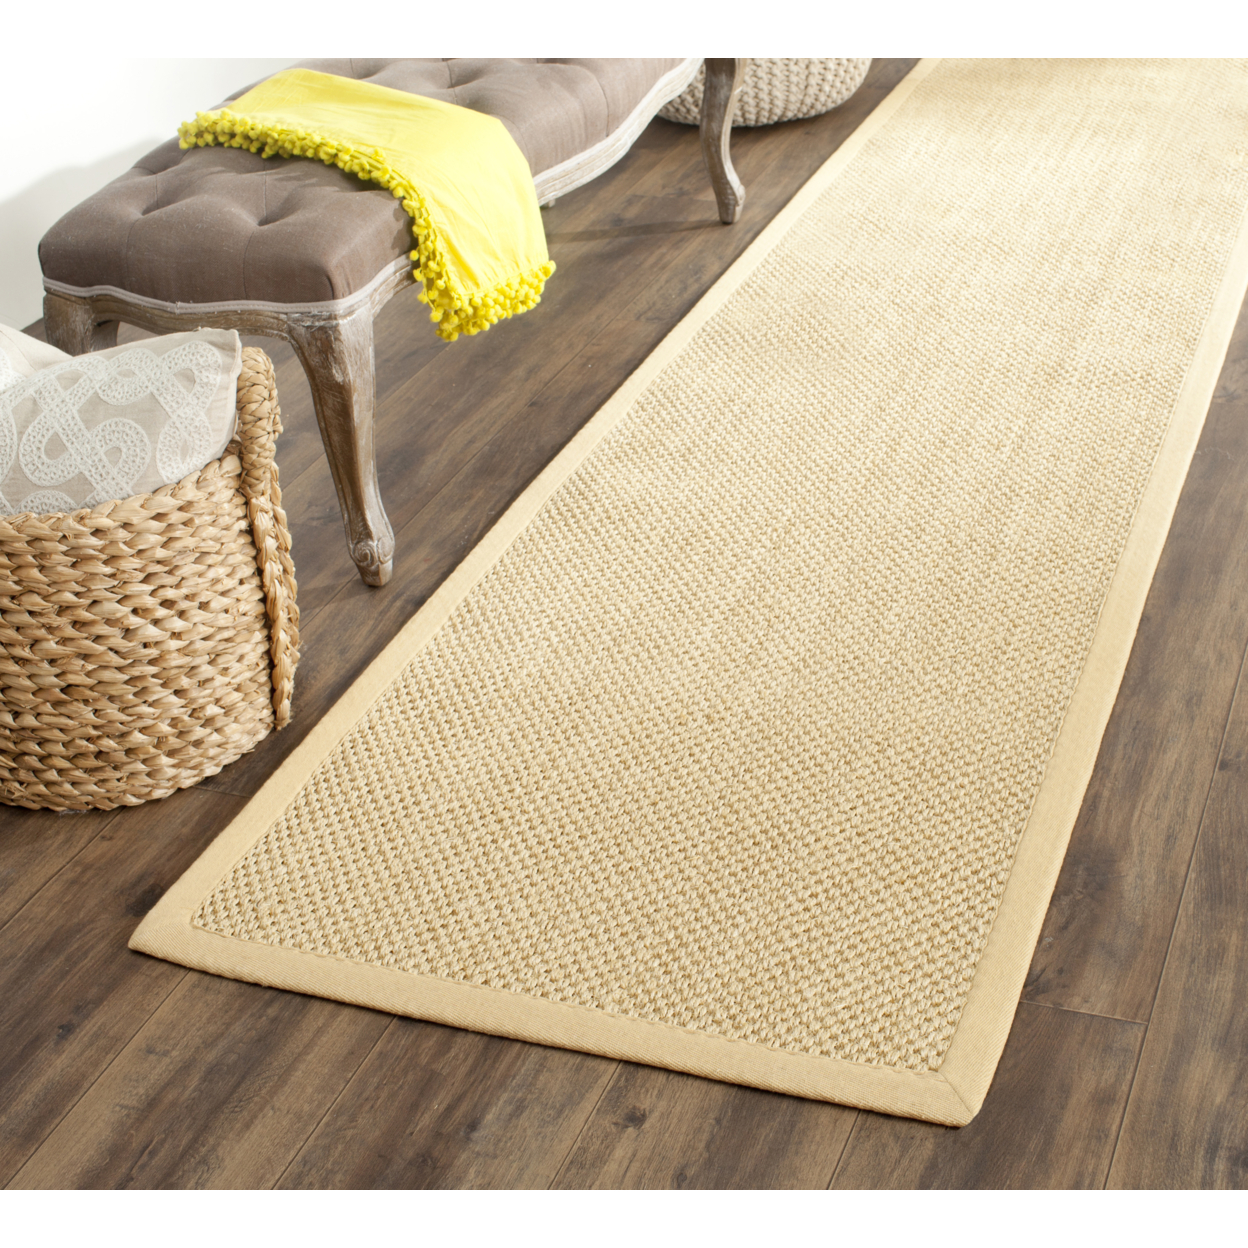 SAFAVIEH Natural Fiber Collection NF443A Maize/Wheat Rug - 2' 6 X 8'